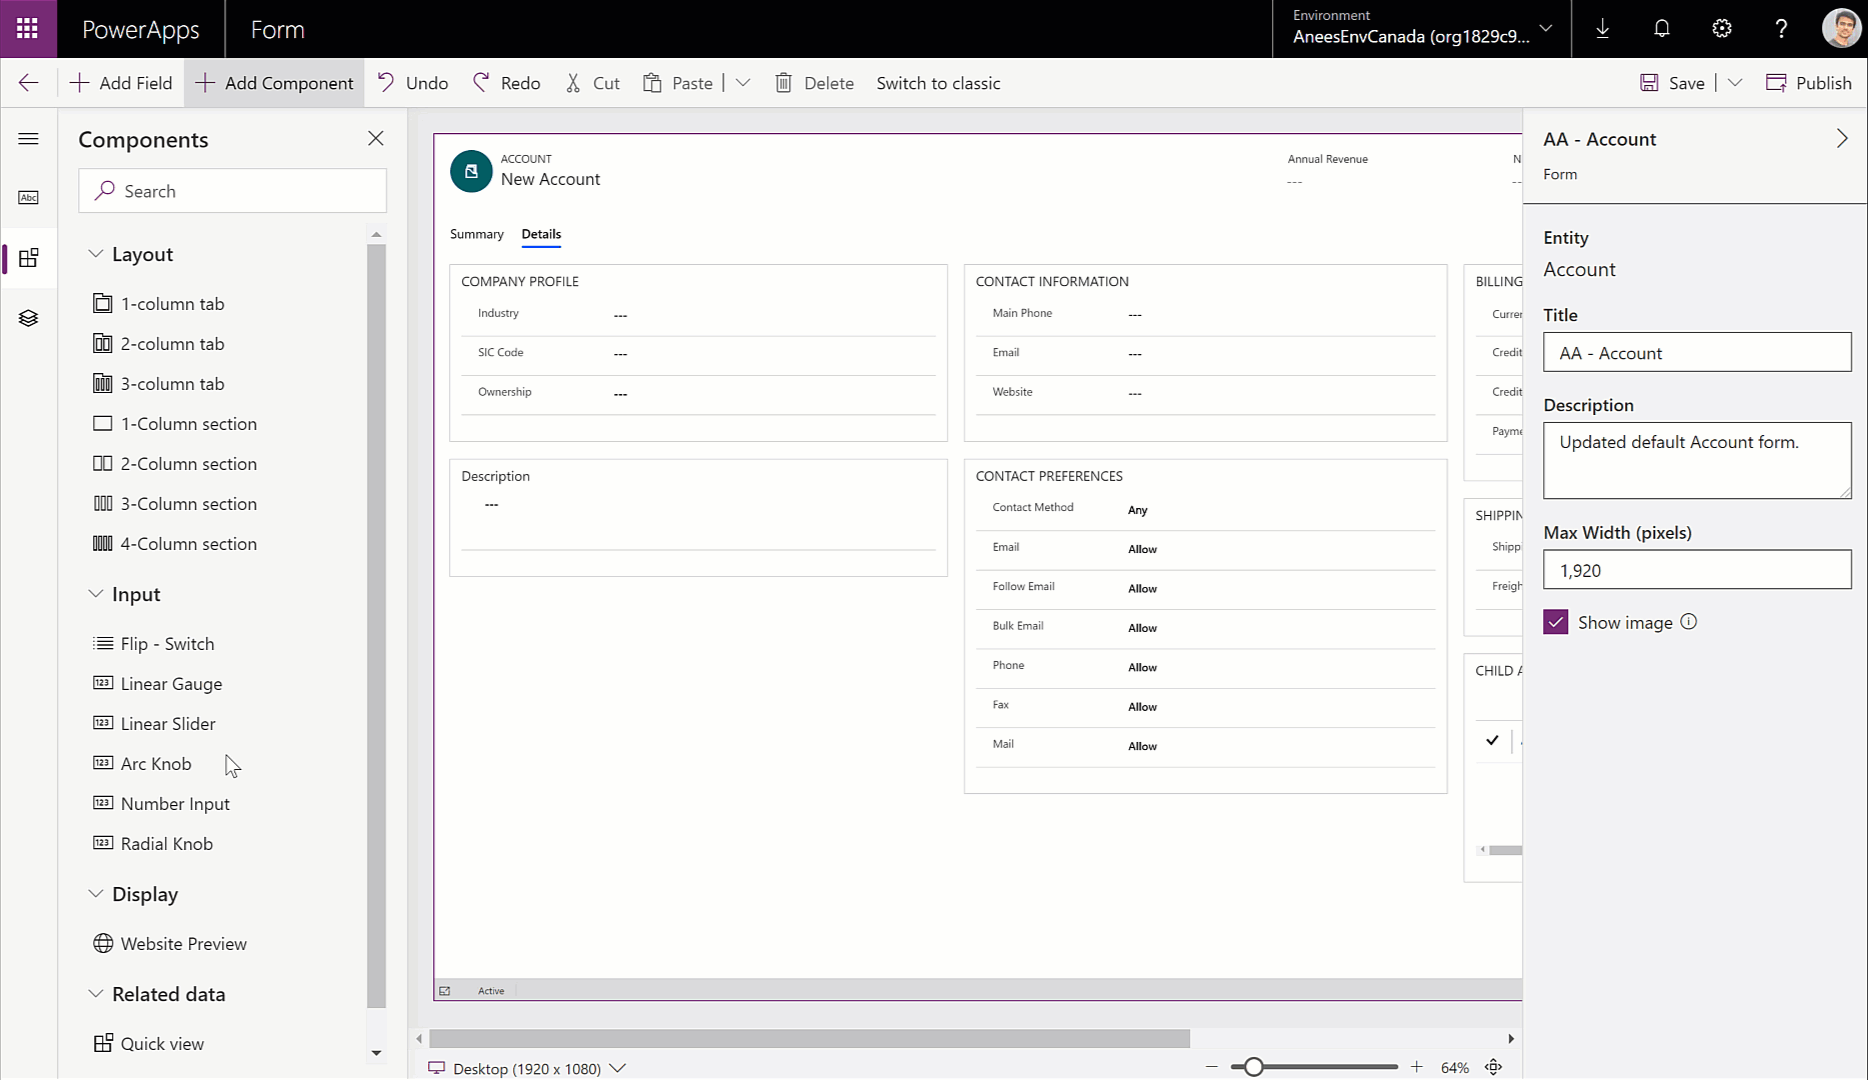 Easily discover and add components to the form